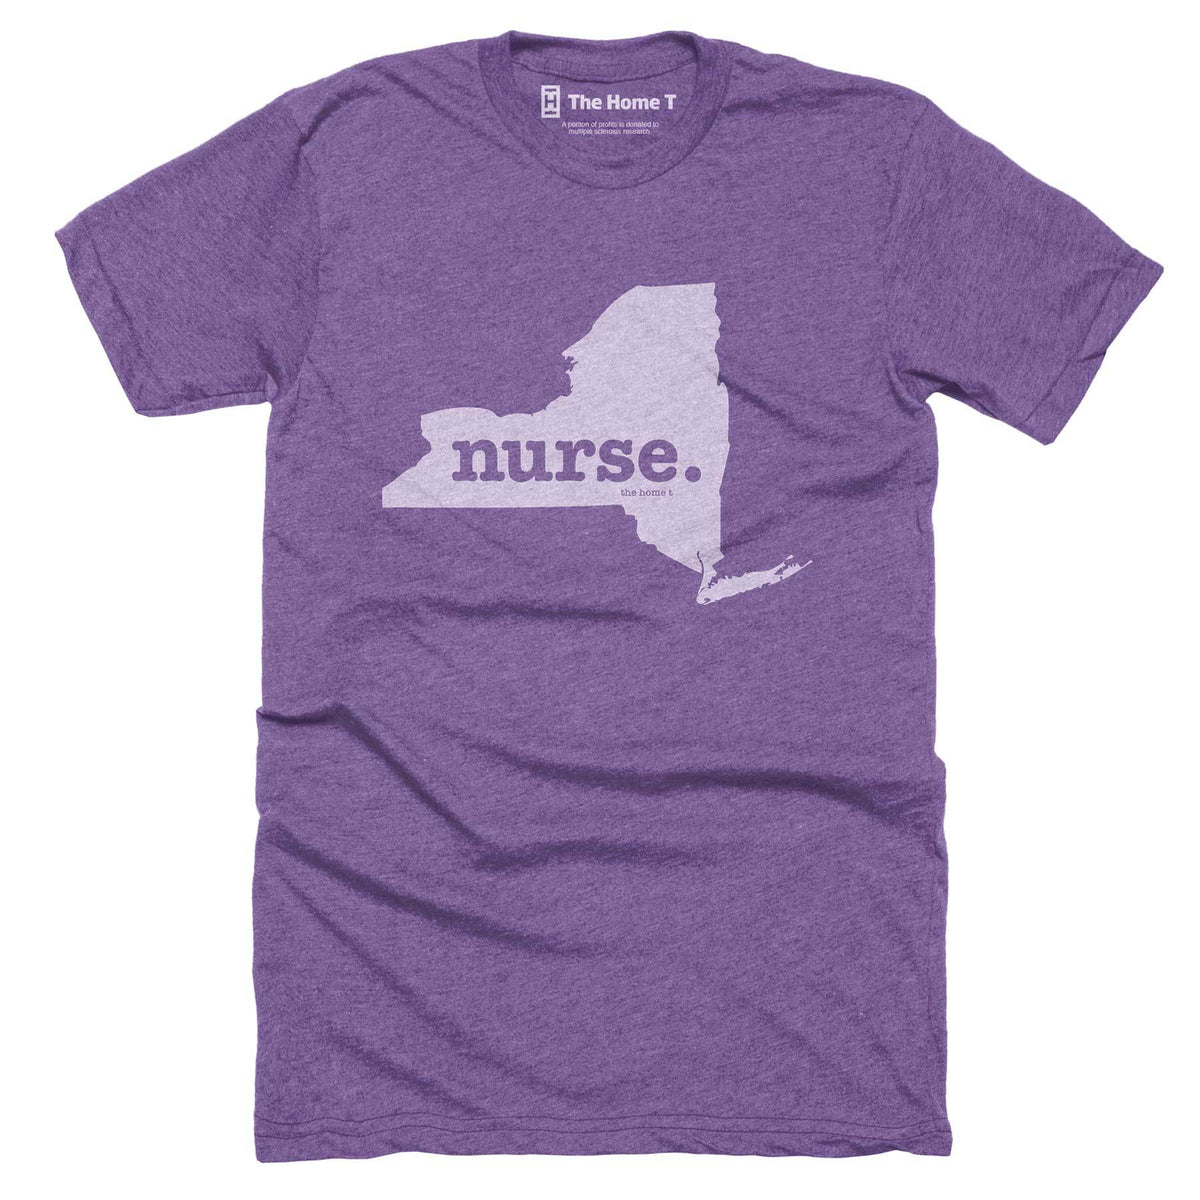 New York Nurse Home T-Shirt Occupation The Home T